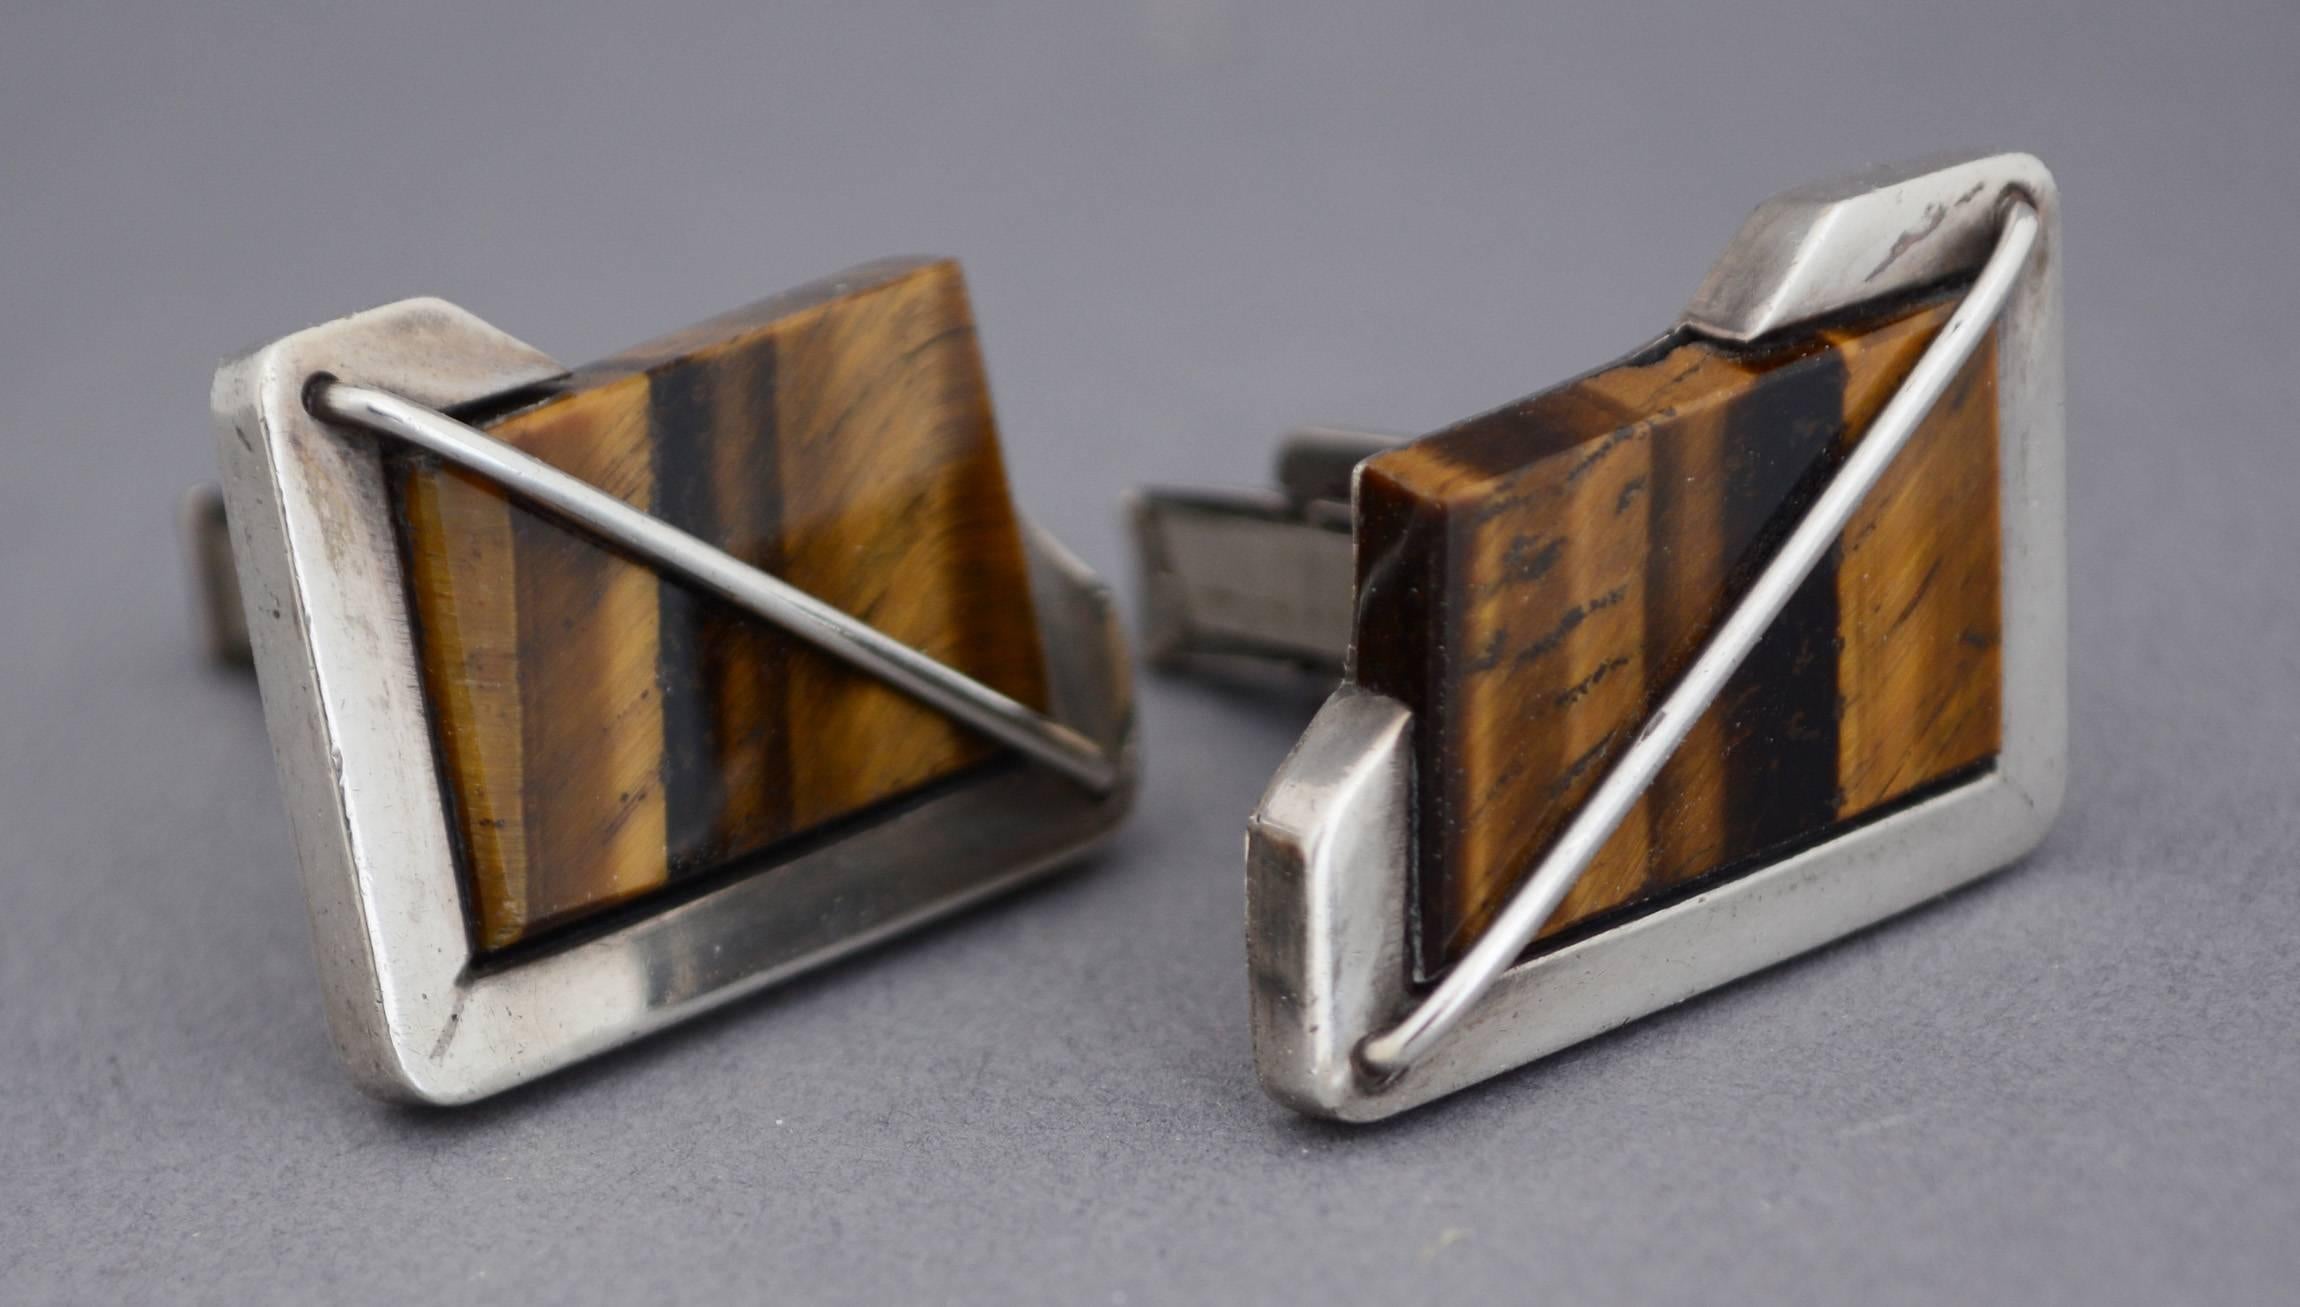 Sterling and tiger eye cufflinks with an asymmetrical modernist design. These were made by the Rancho Alegre shop in Taxco, Mexico.